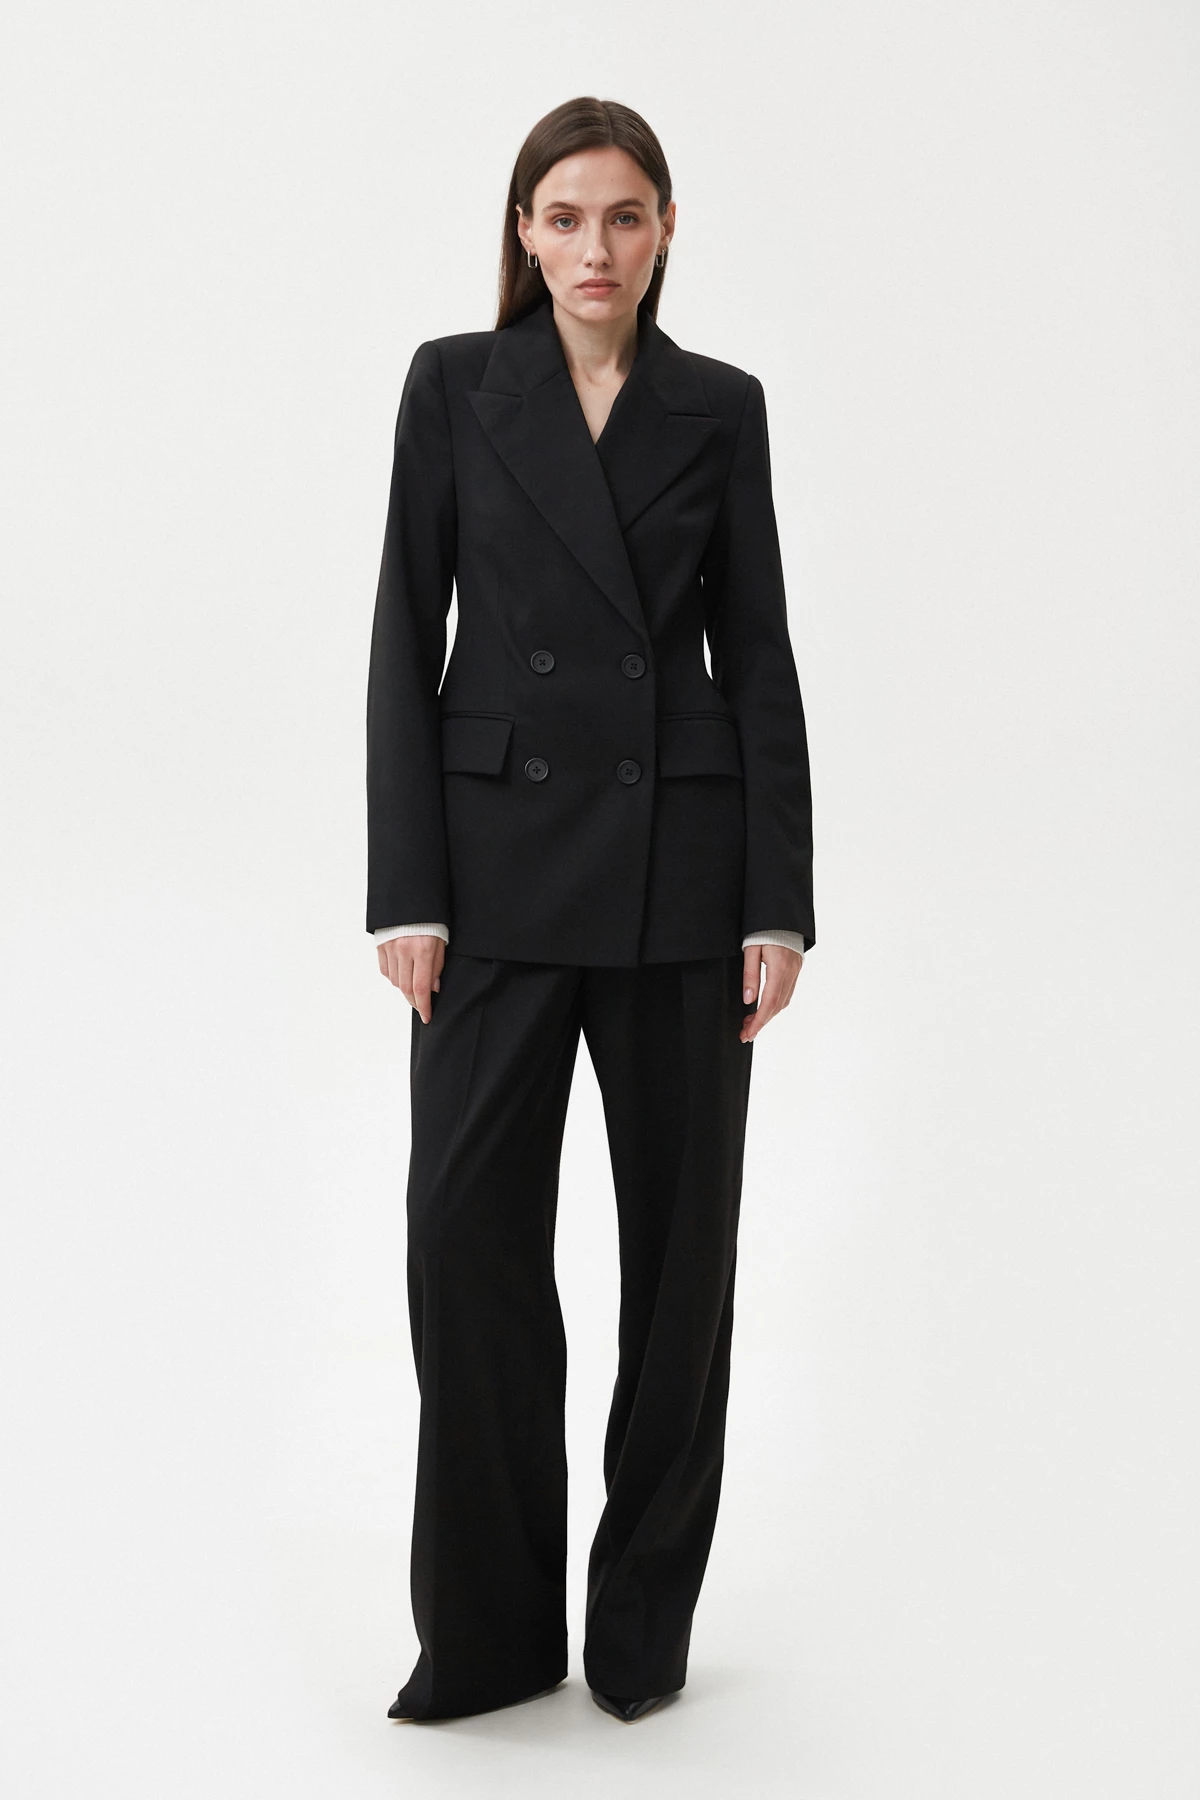 Black loose fit pants made of viscose suit fabric, photo 4